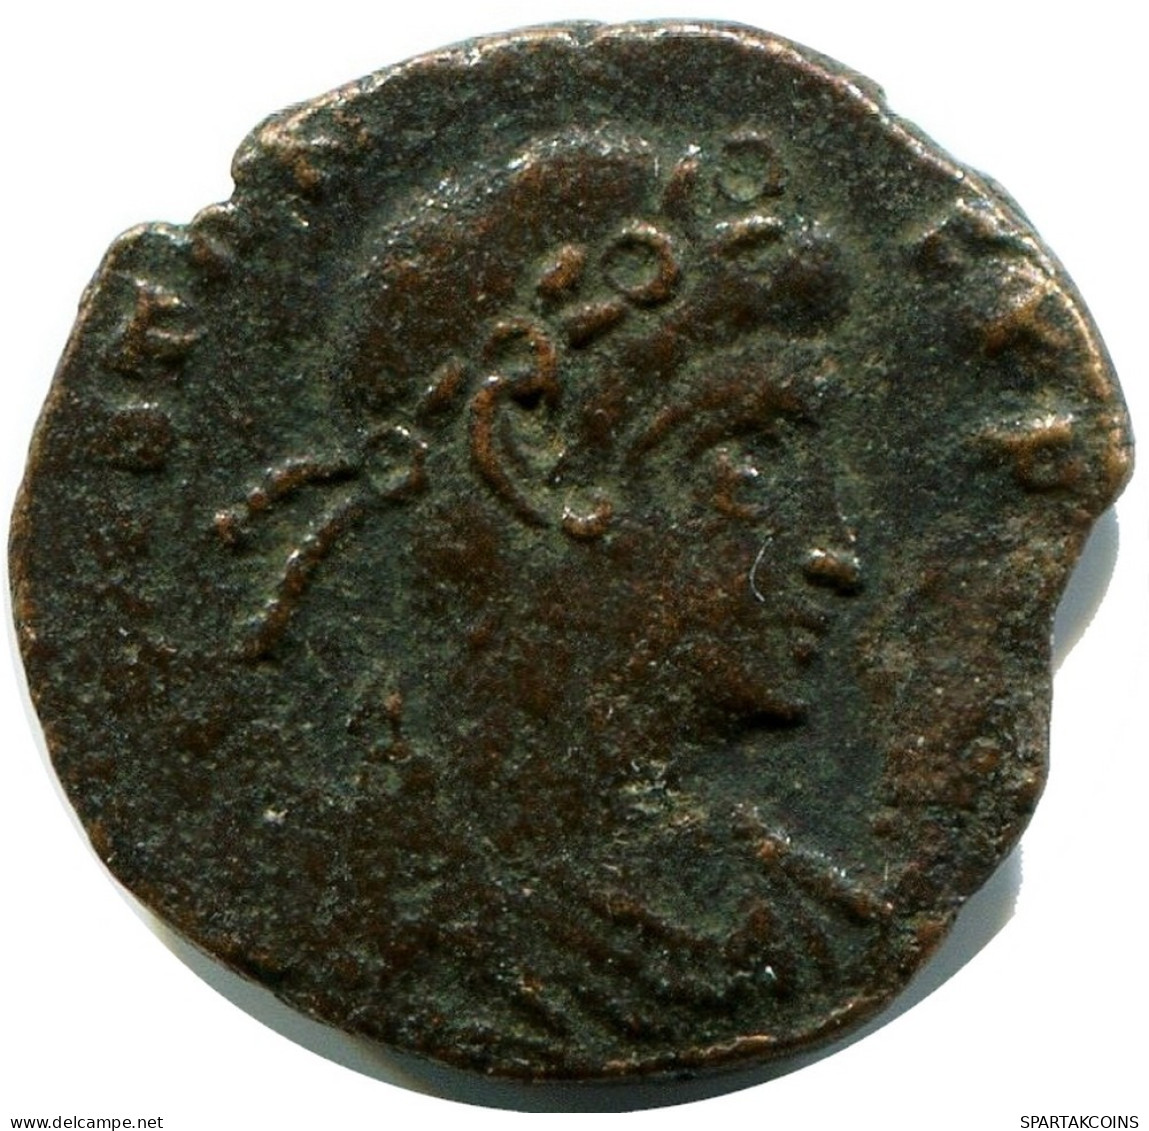 CONSTANS MINTED IN ROME ITALY FROM THE ROYAL ONTARIO MUSEUM #ANC11498.14.E.A - The Christian Empire (307 AD To 363 AD)